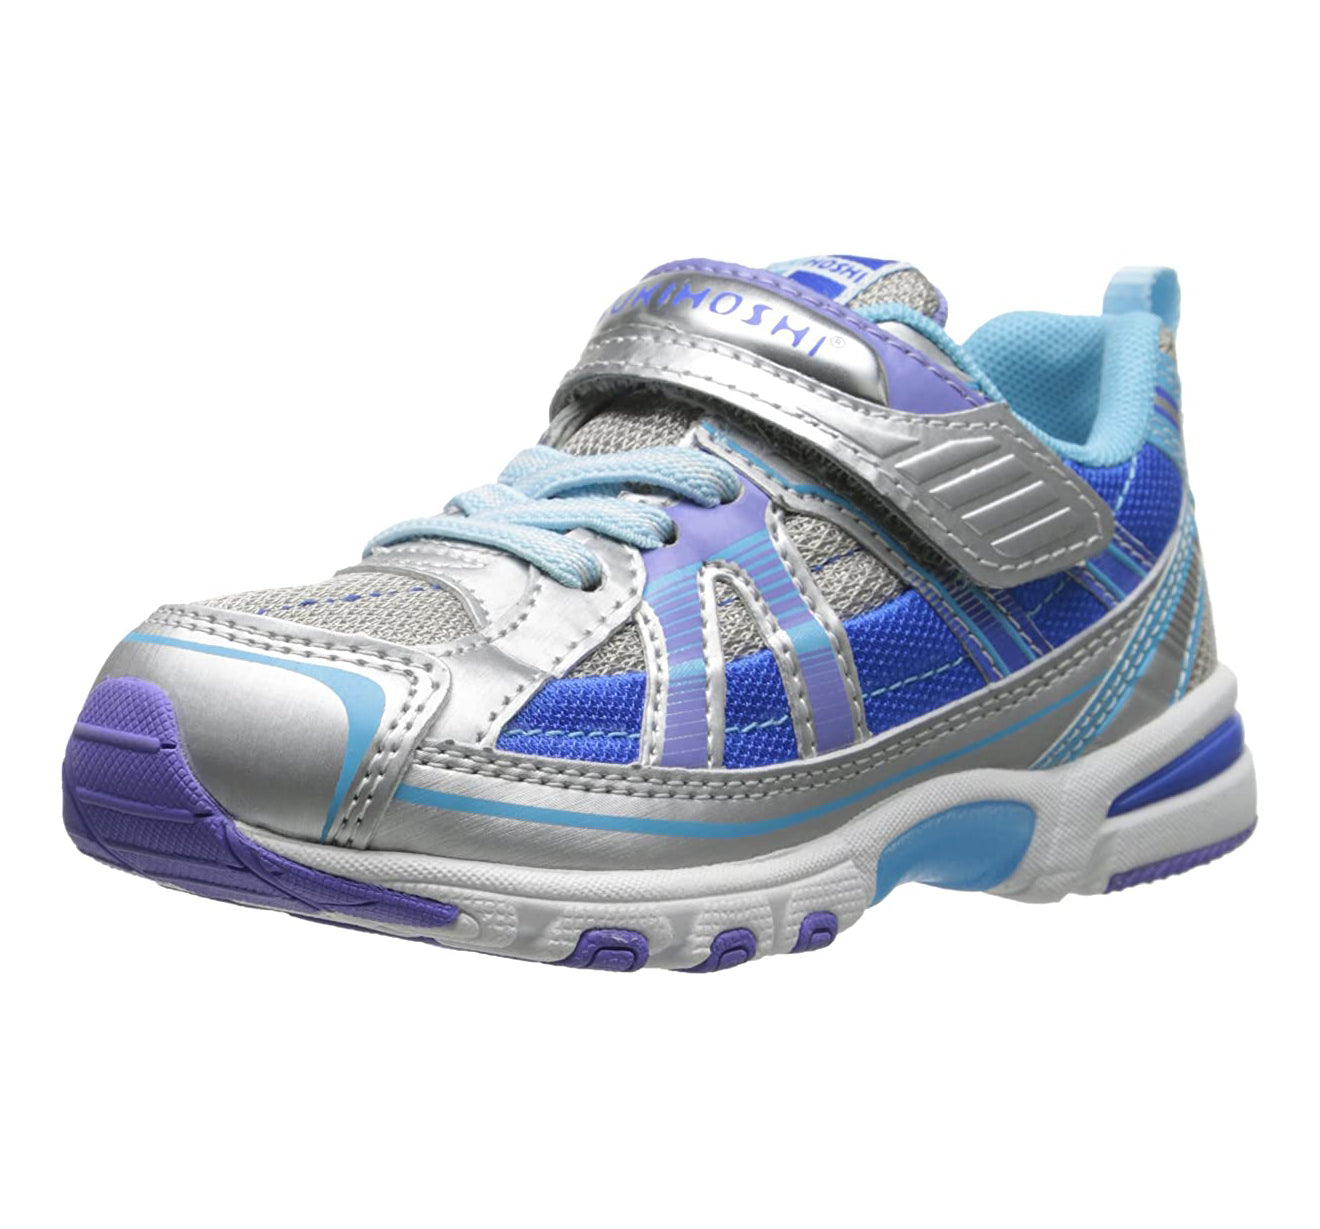 Child Tsukihoshi Storm Sneaker in Silver/Aqua from the front view